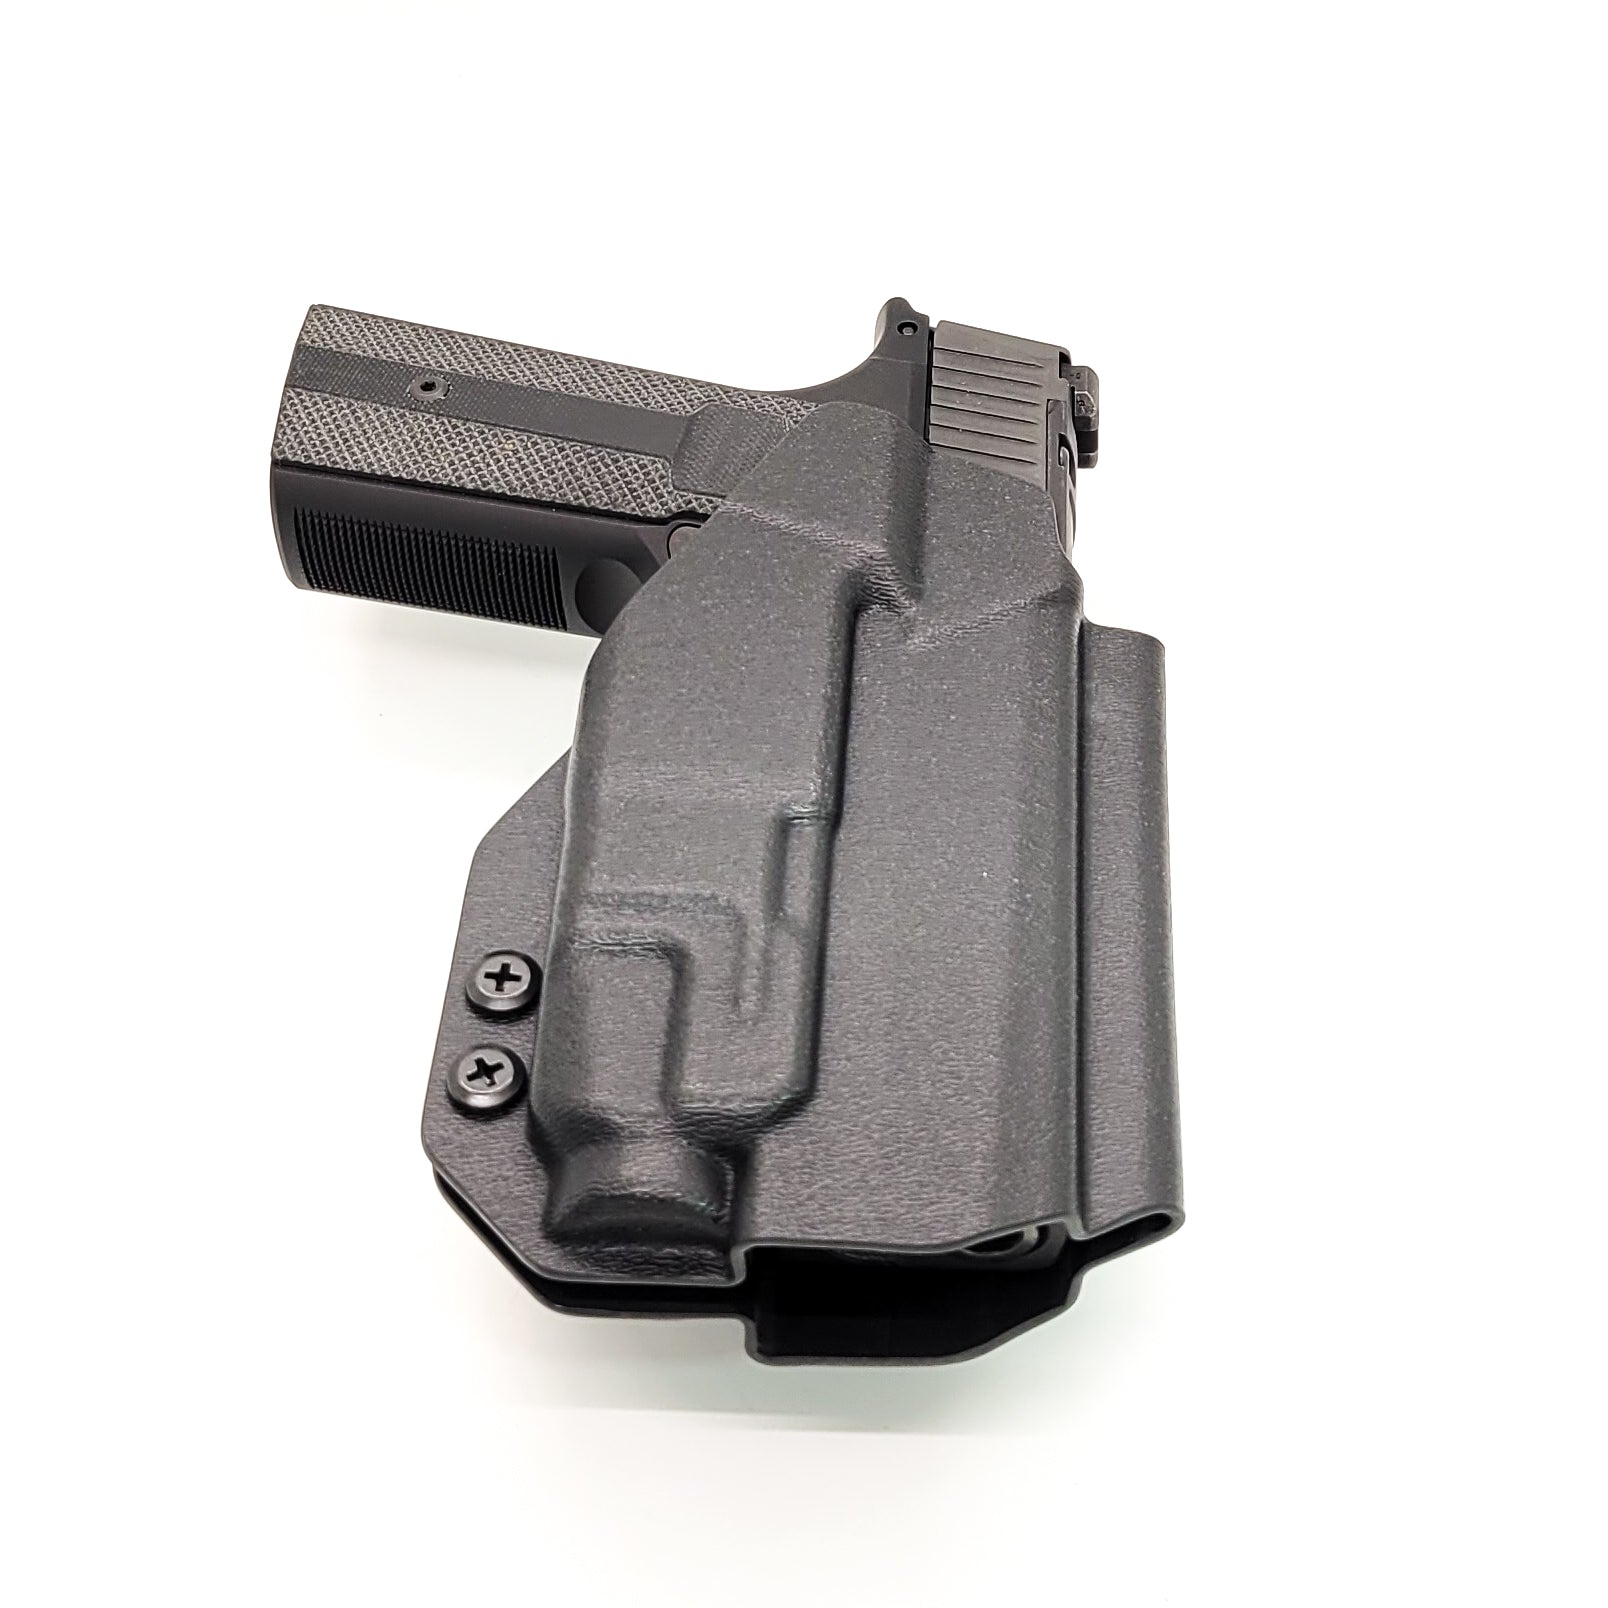 For the best concealed OWN Outside Waistband Kydex Holster designed to fit the Sig Sauer P365-XMACRO, P365, and P365XL with the Mischief Machine Alpha, Omega, & Commander Grip Module and the Streamlight TLR-7A or TLR-7, shop Four Brothers Holsters. Full sweat guard, Open muzzle, cut for red dot sights. MACRO TLR7 TLR 7